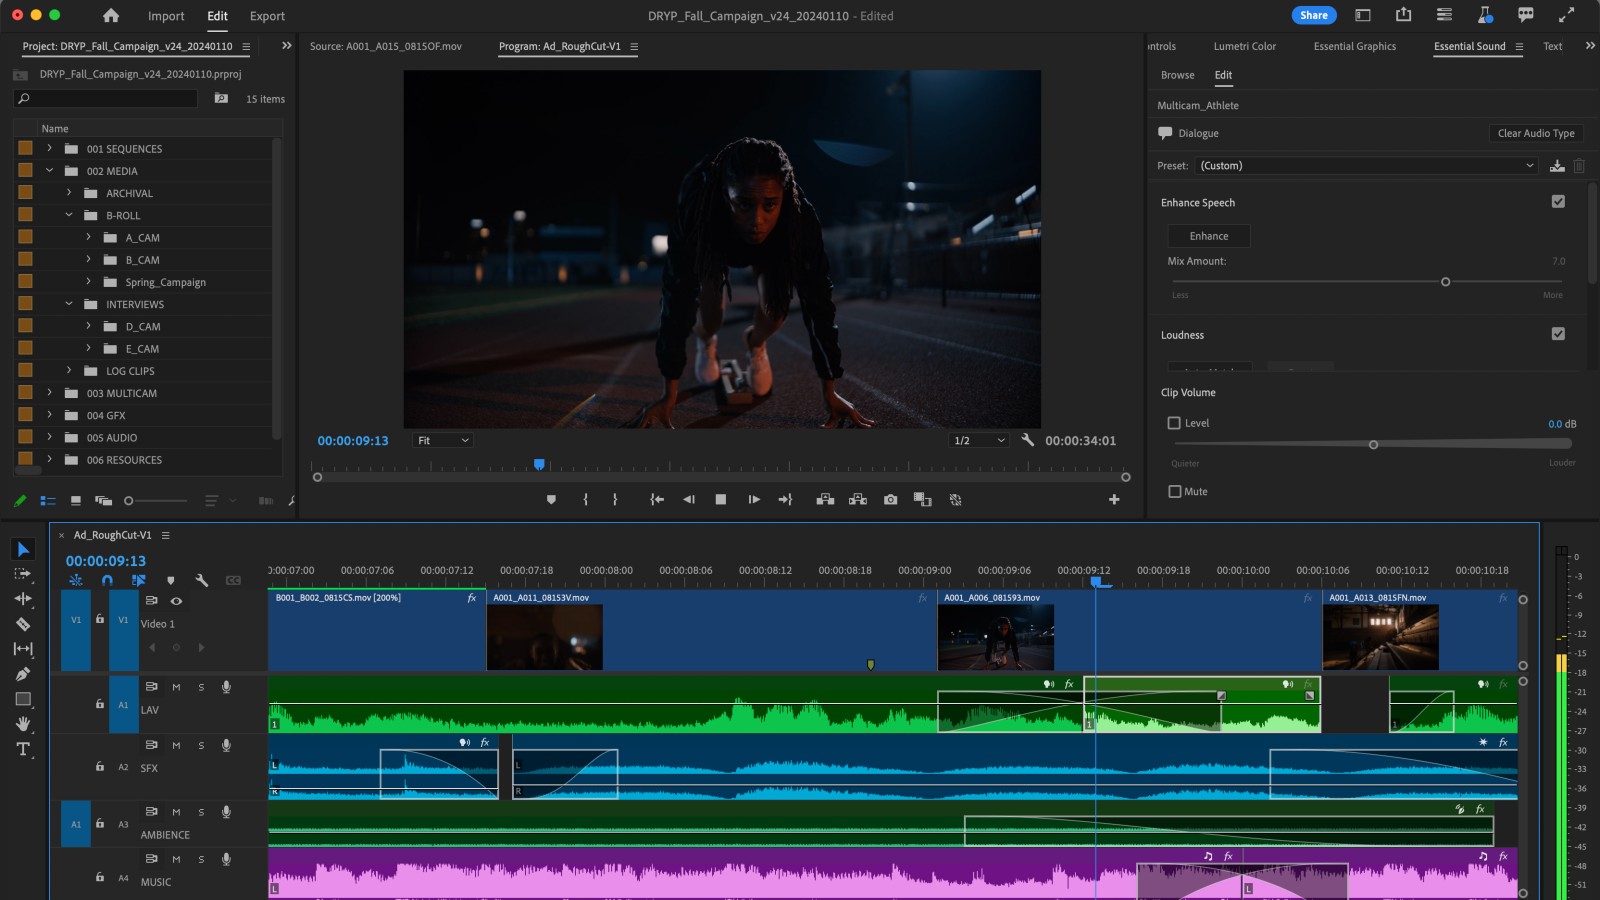 Adobe simplifies audio editing in new Premiere Pro update | Technology News